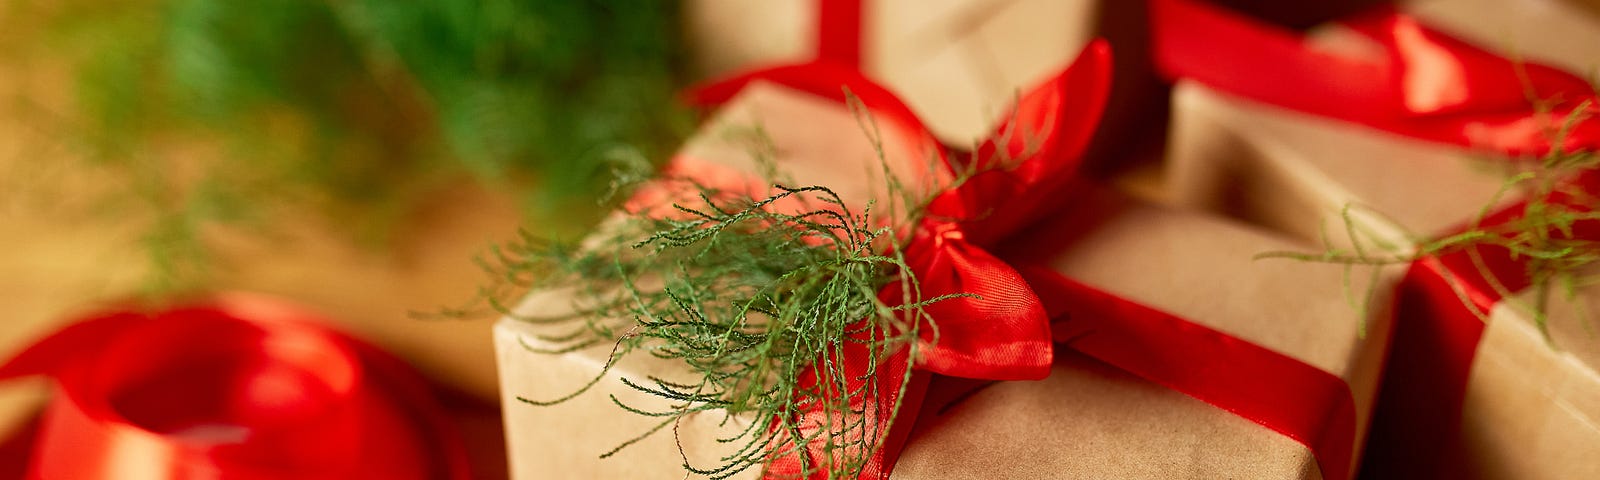 A box wrapped in paper with a red bow.